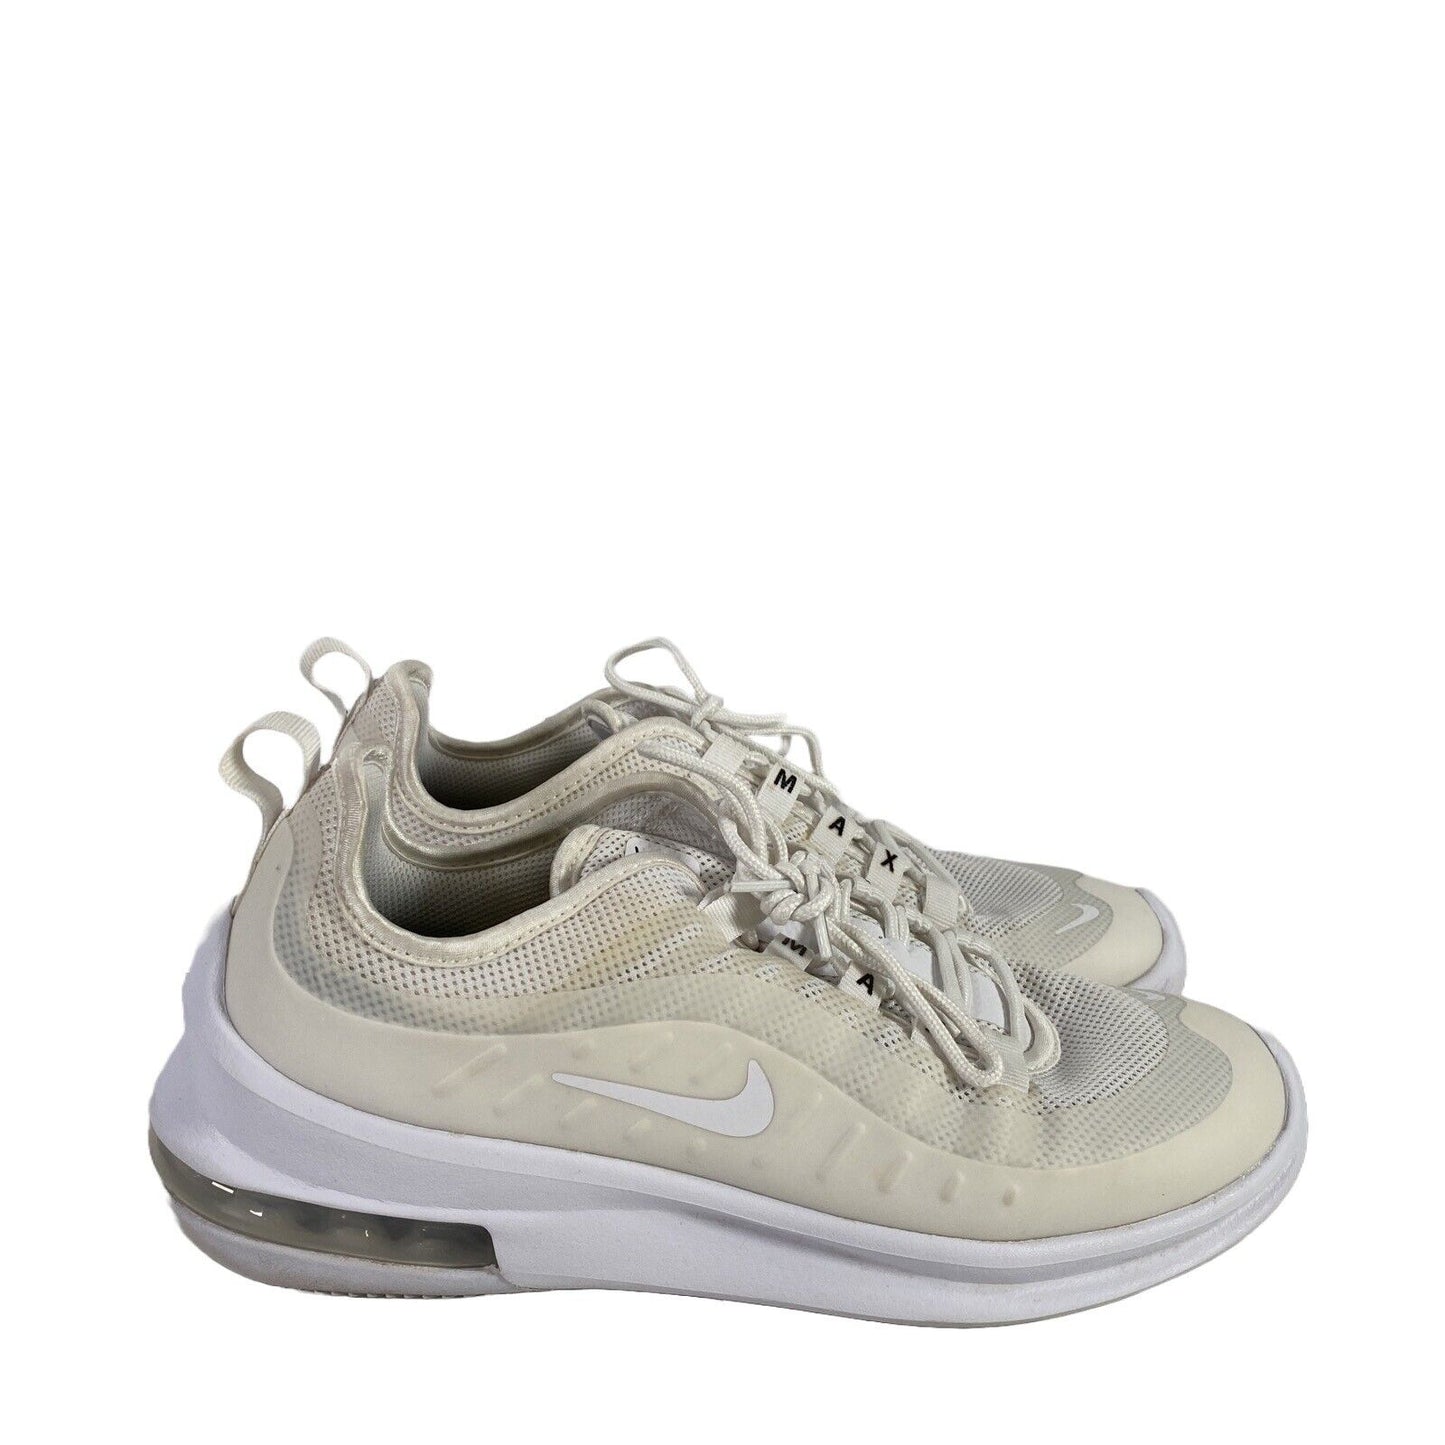 Nike Women's White Air Max AA2168 Lace Up Athletic Sneakers - 8